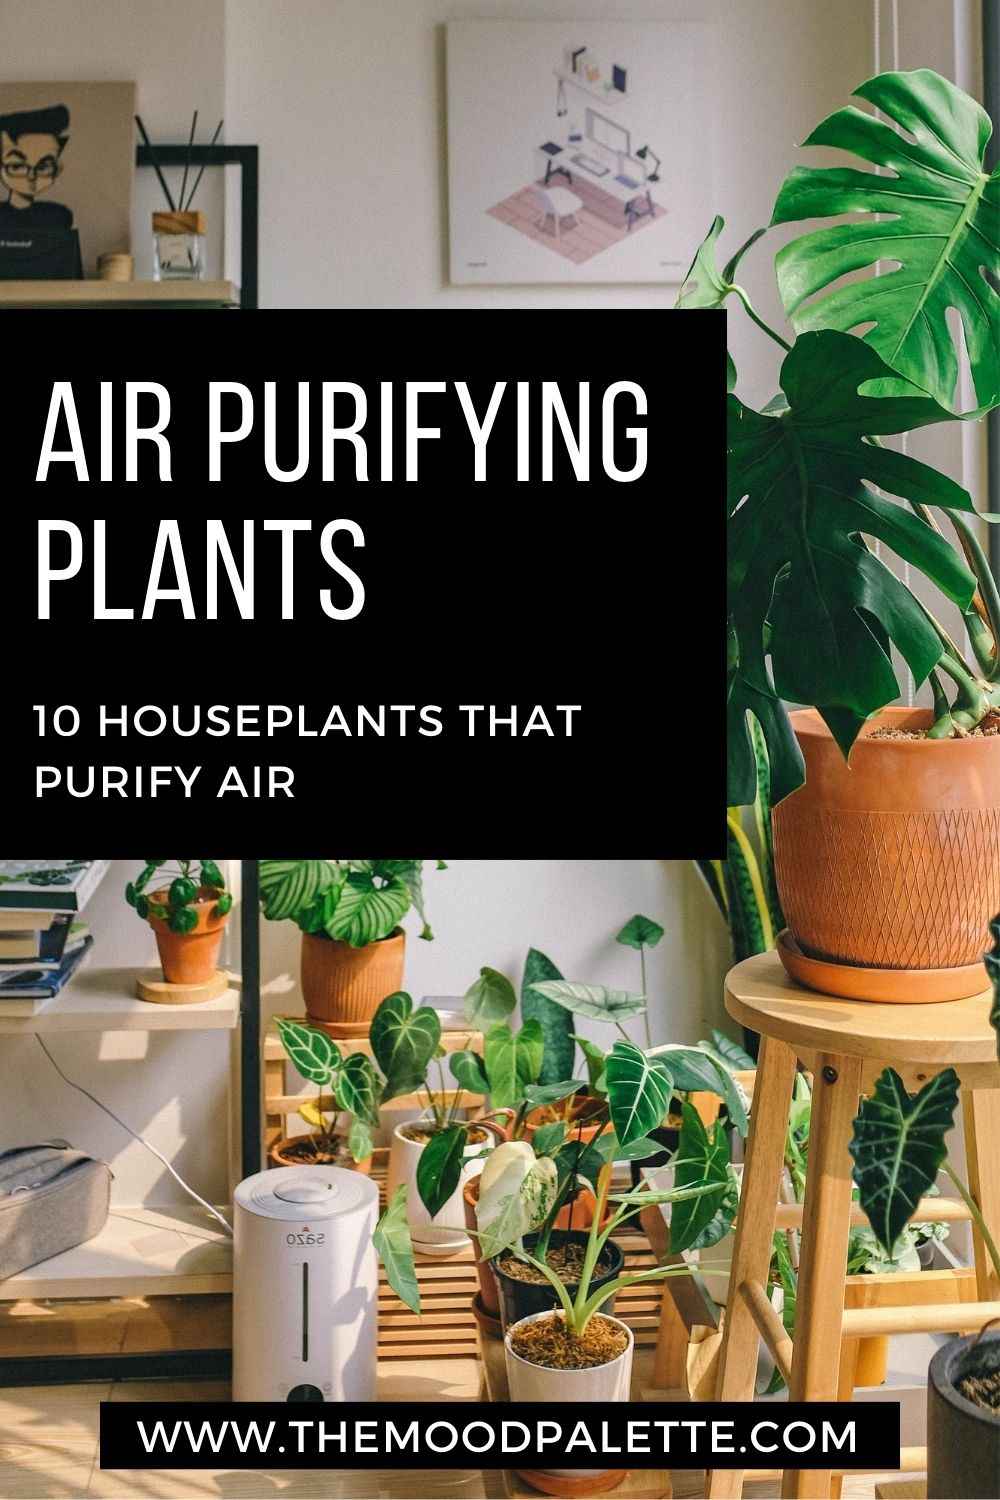 You are currently viewing Air Purifying Plants: 10 Houseplants That Purify Air